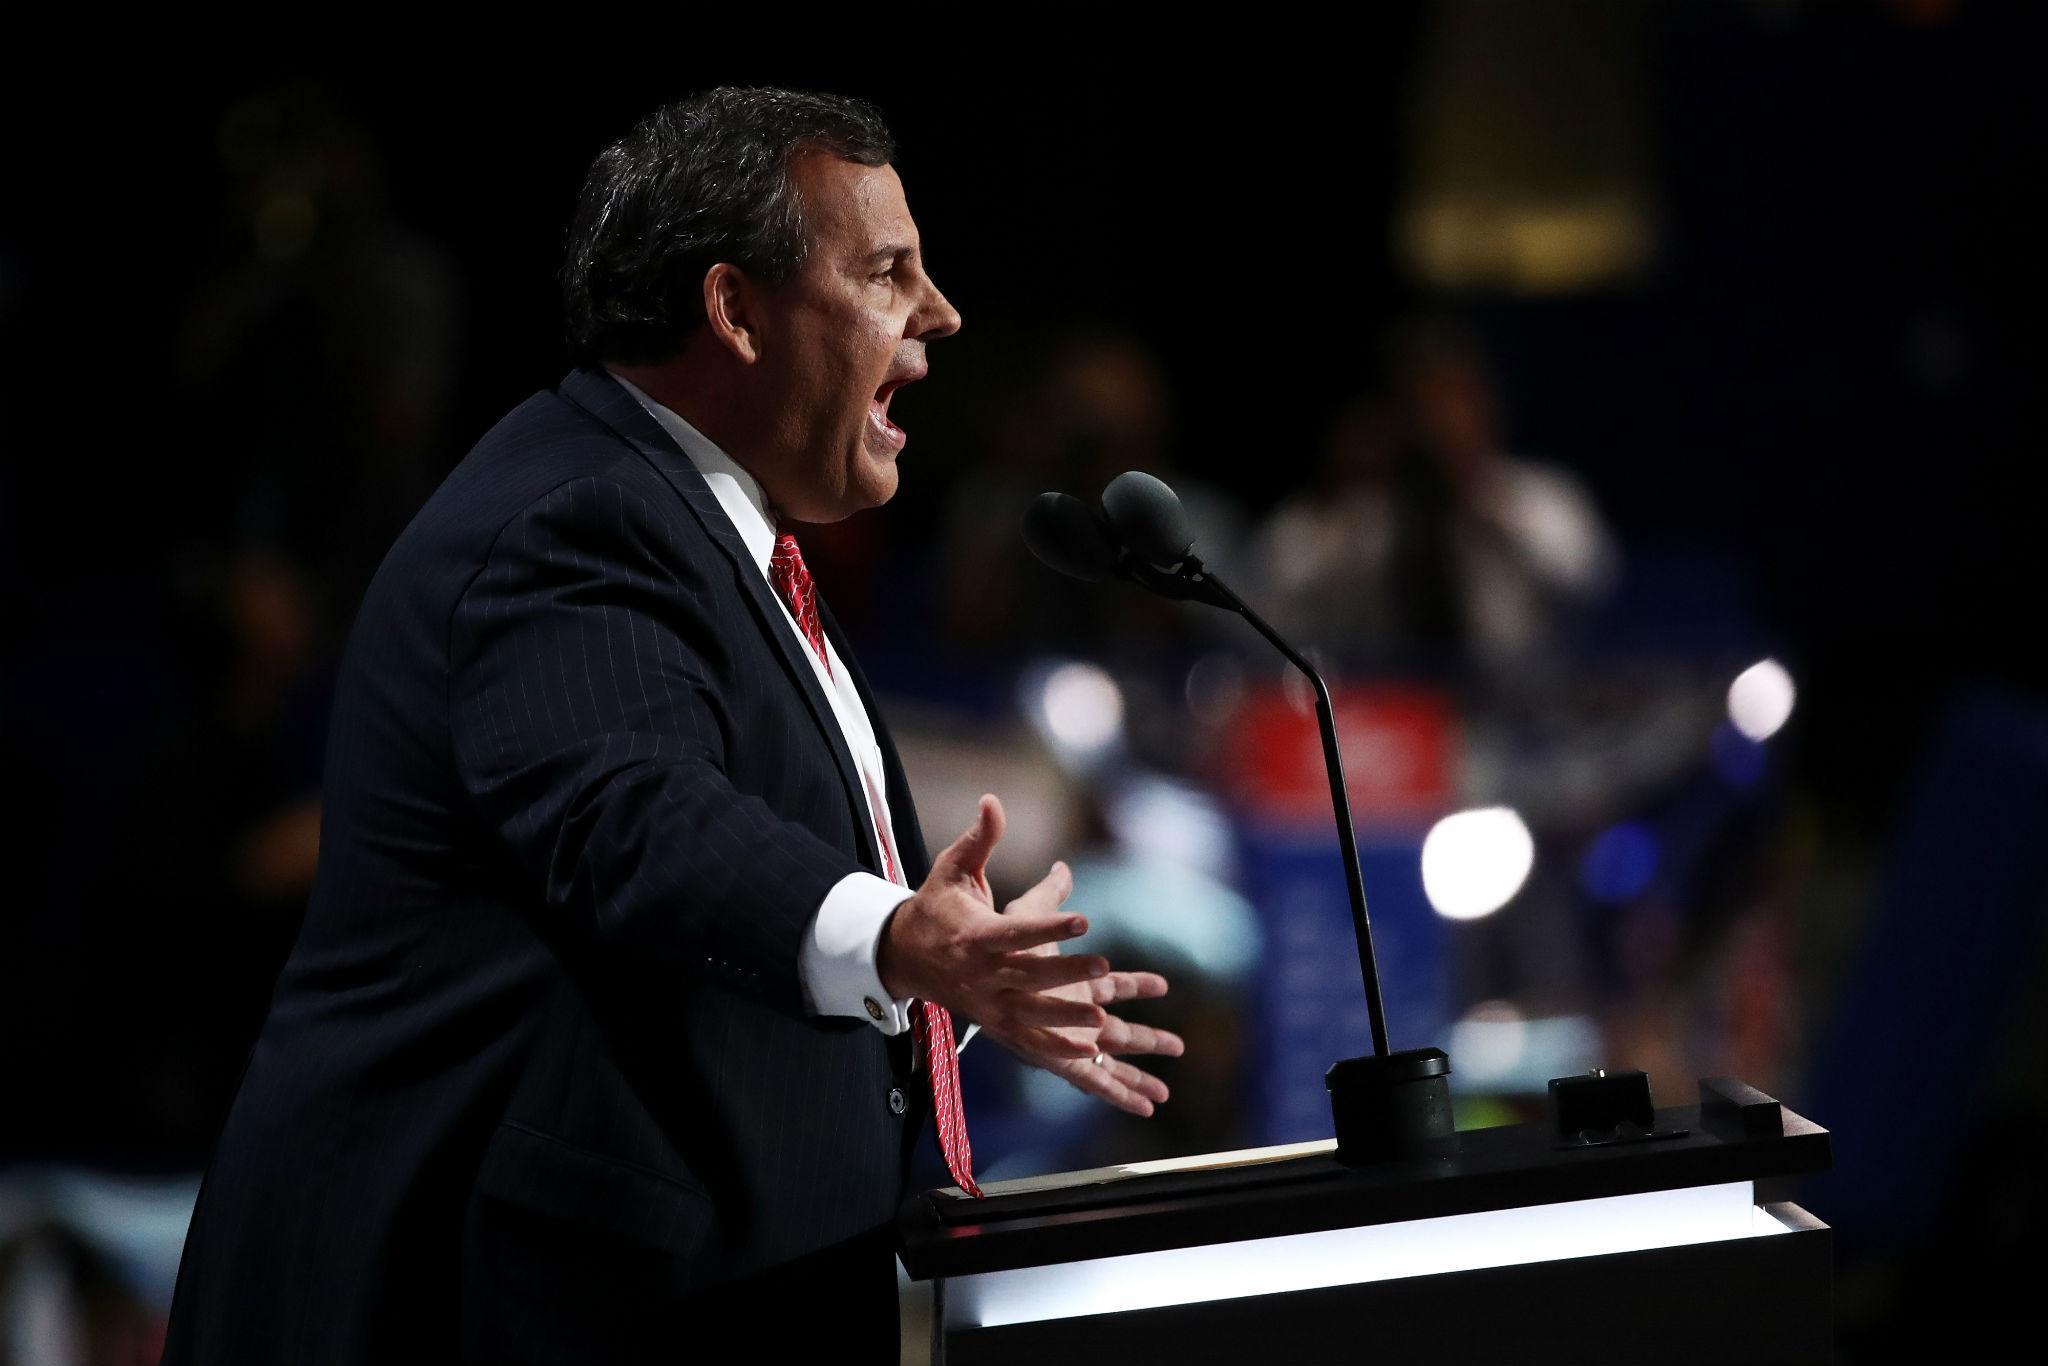 &#13;
‘Every region of the world has been infected with Hillary Clinton's flawed judgement’, Chris Christie told Republican delegates in Cleveland (Getty)&#13;